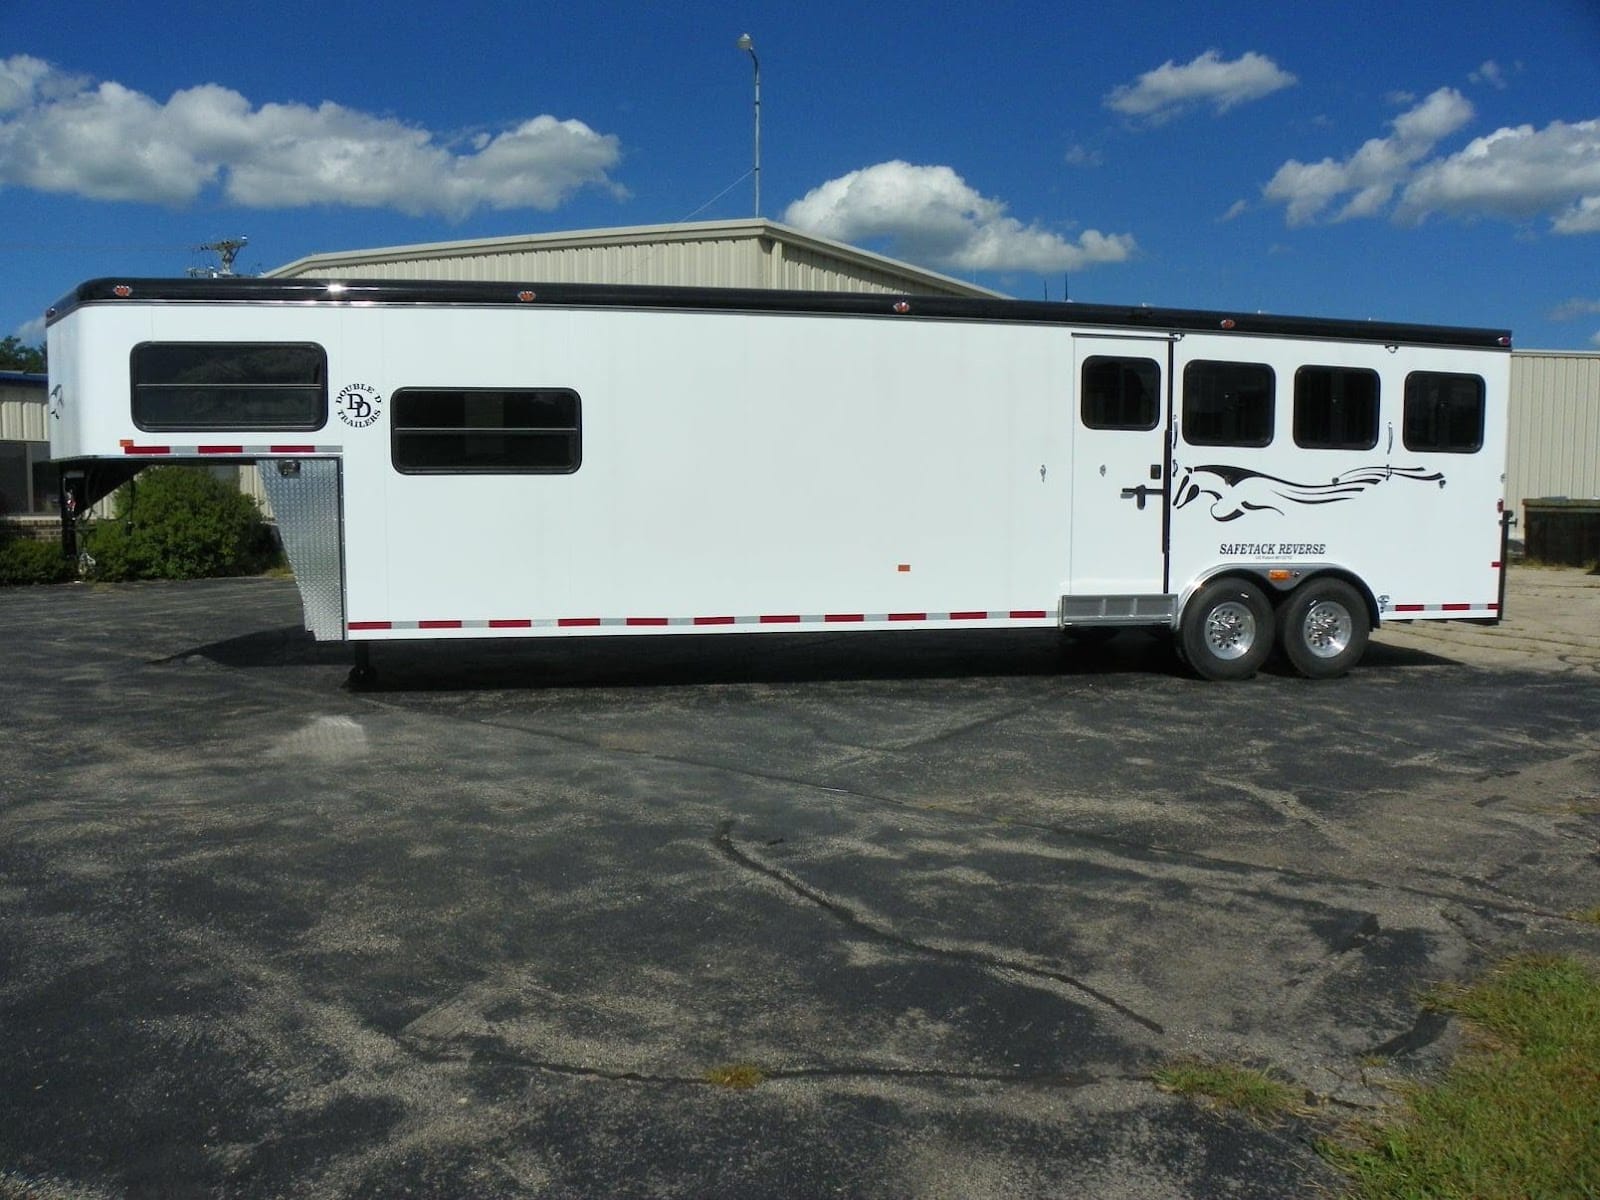 4 Horse LQ Trailer by Double D trailers